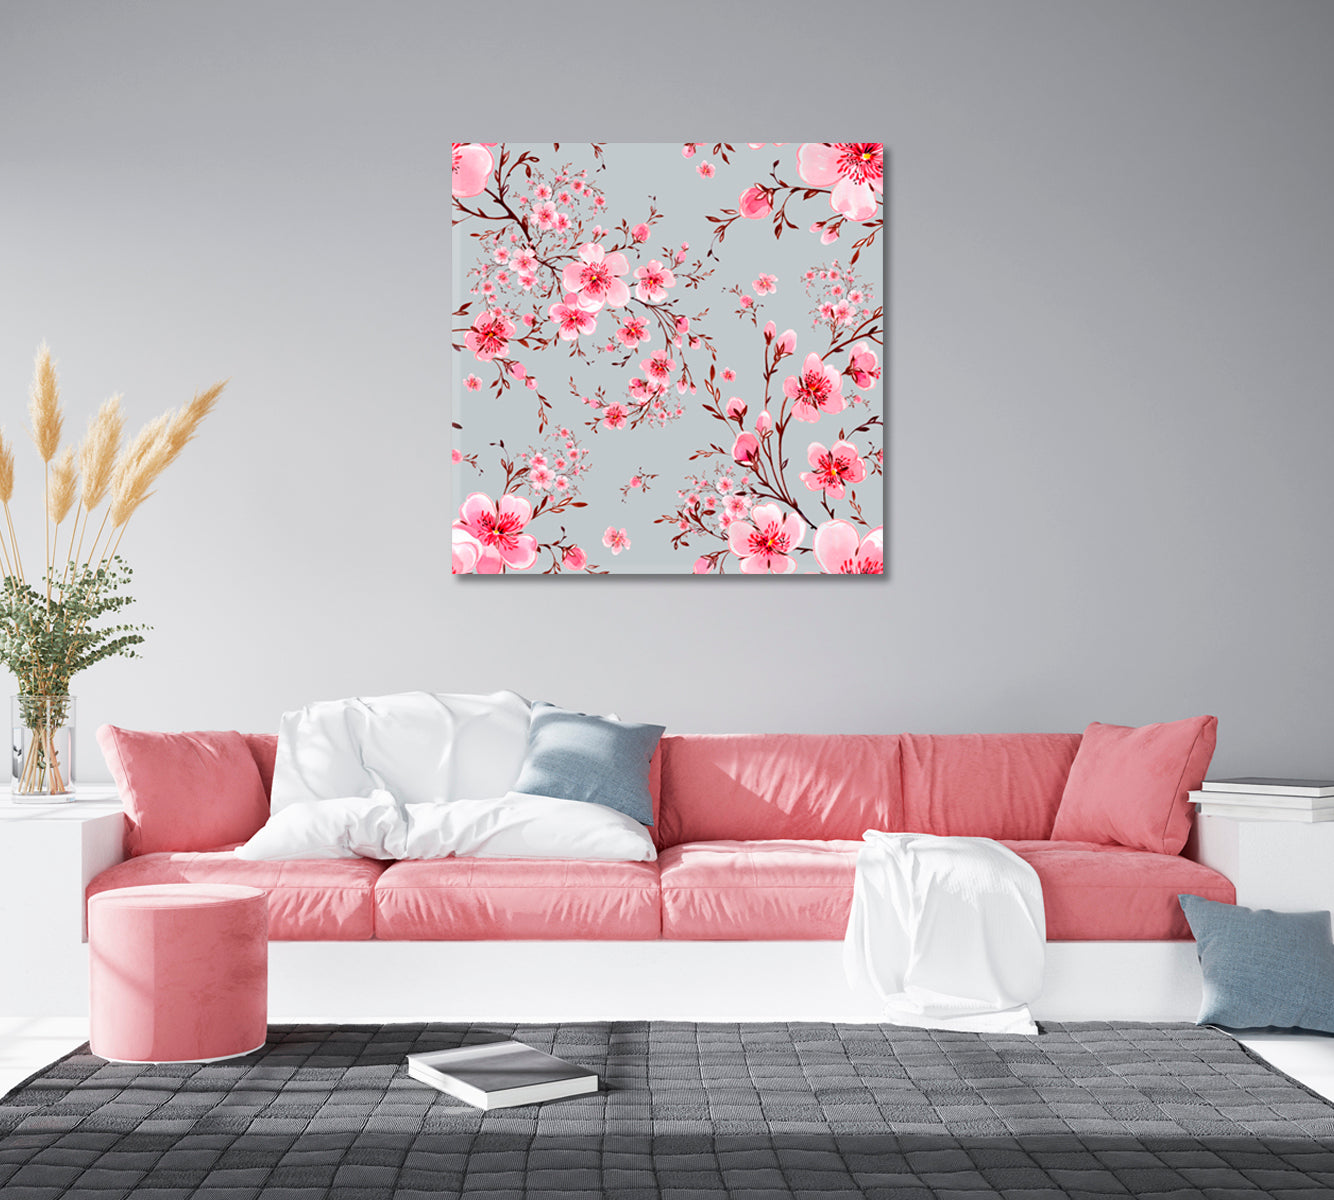 Abstract Beautiful Pink Flowers Canvas Print-Canvas Print-CetArt-1 panel-12x12 inches-CetArt